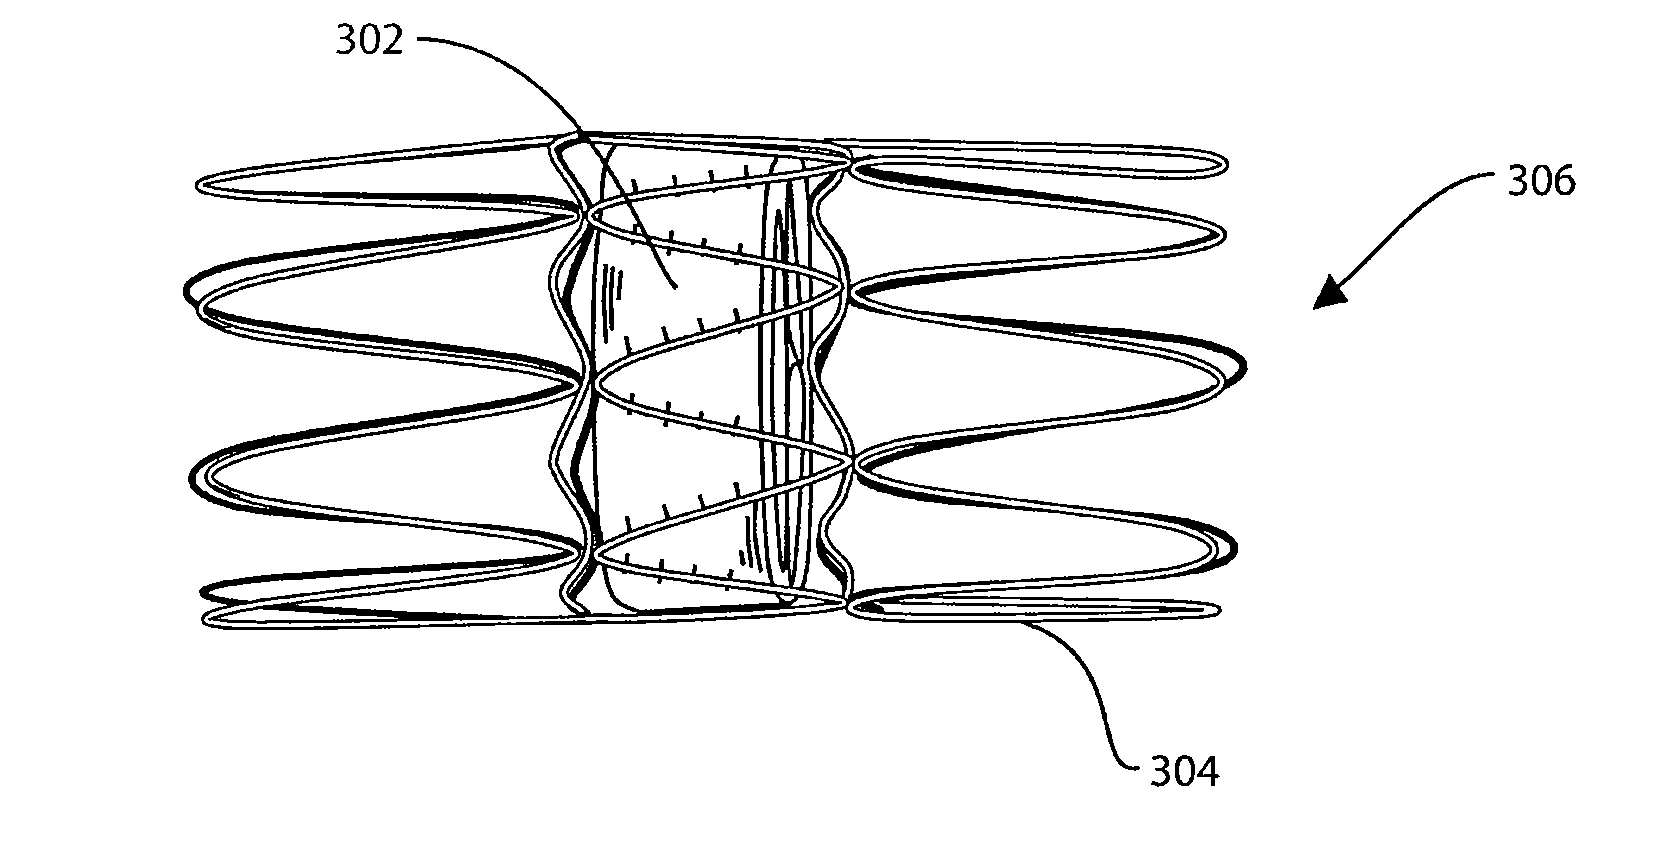 Catheter delivered valve having a barrier to provide an enhanced seal